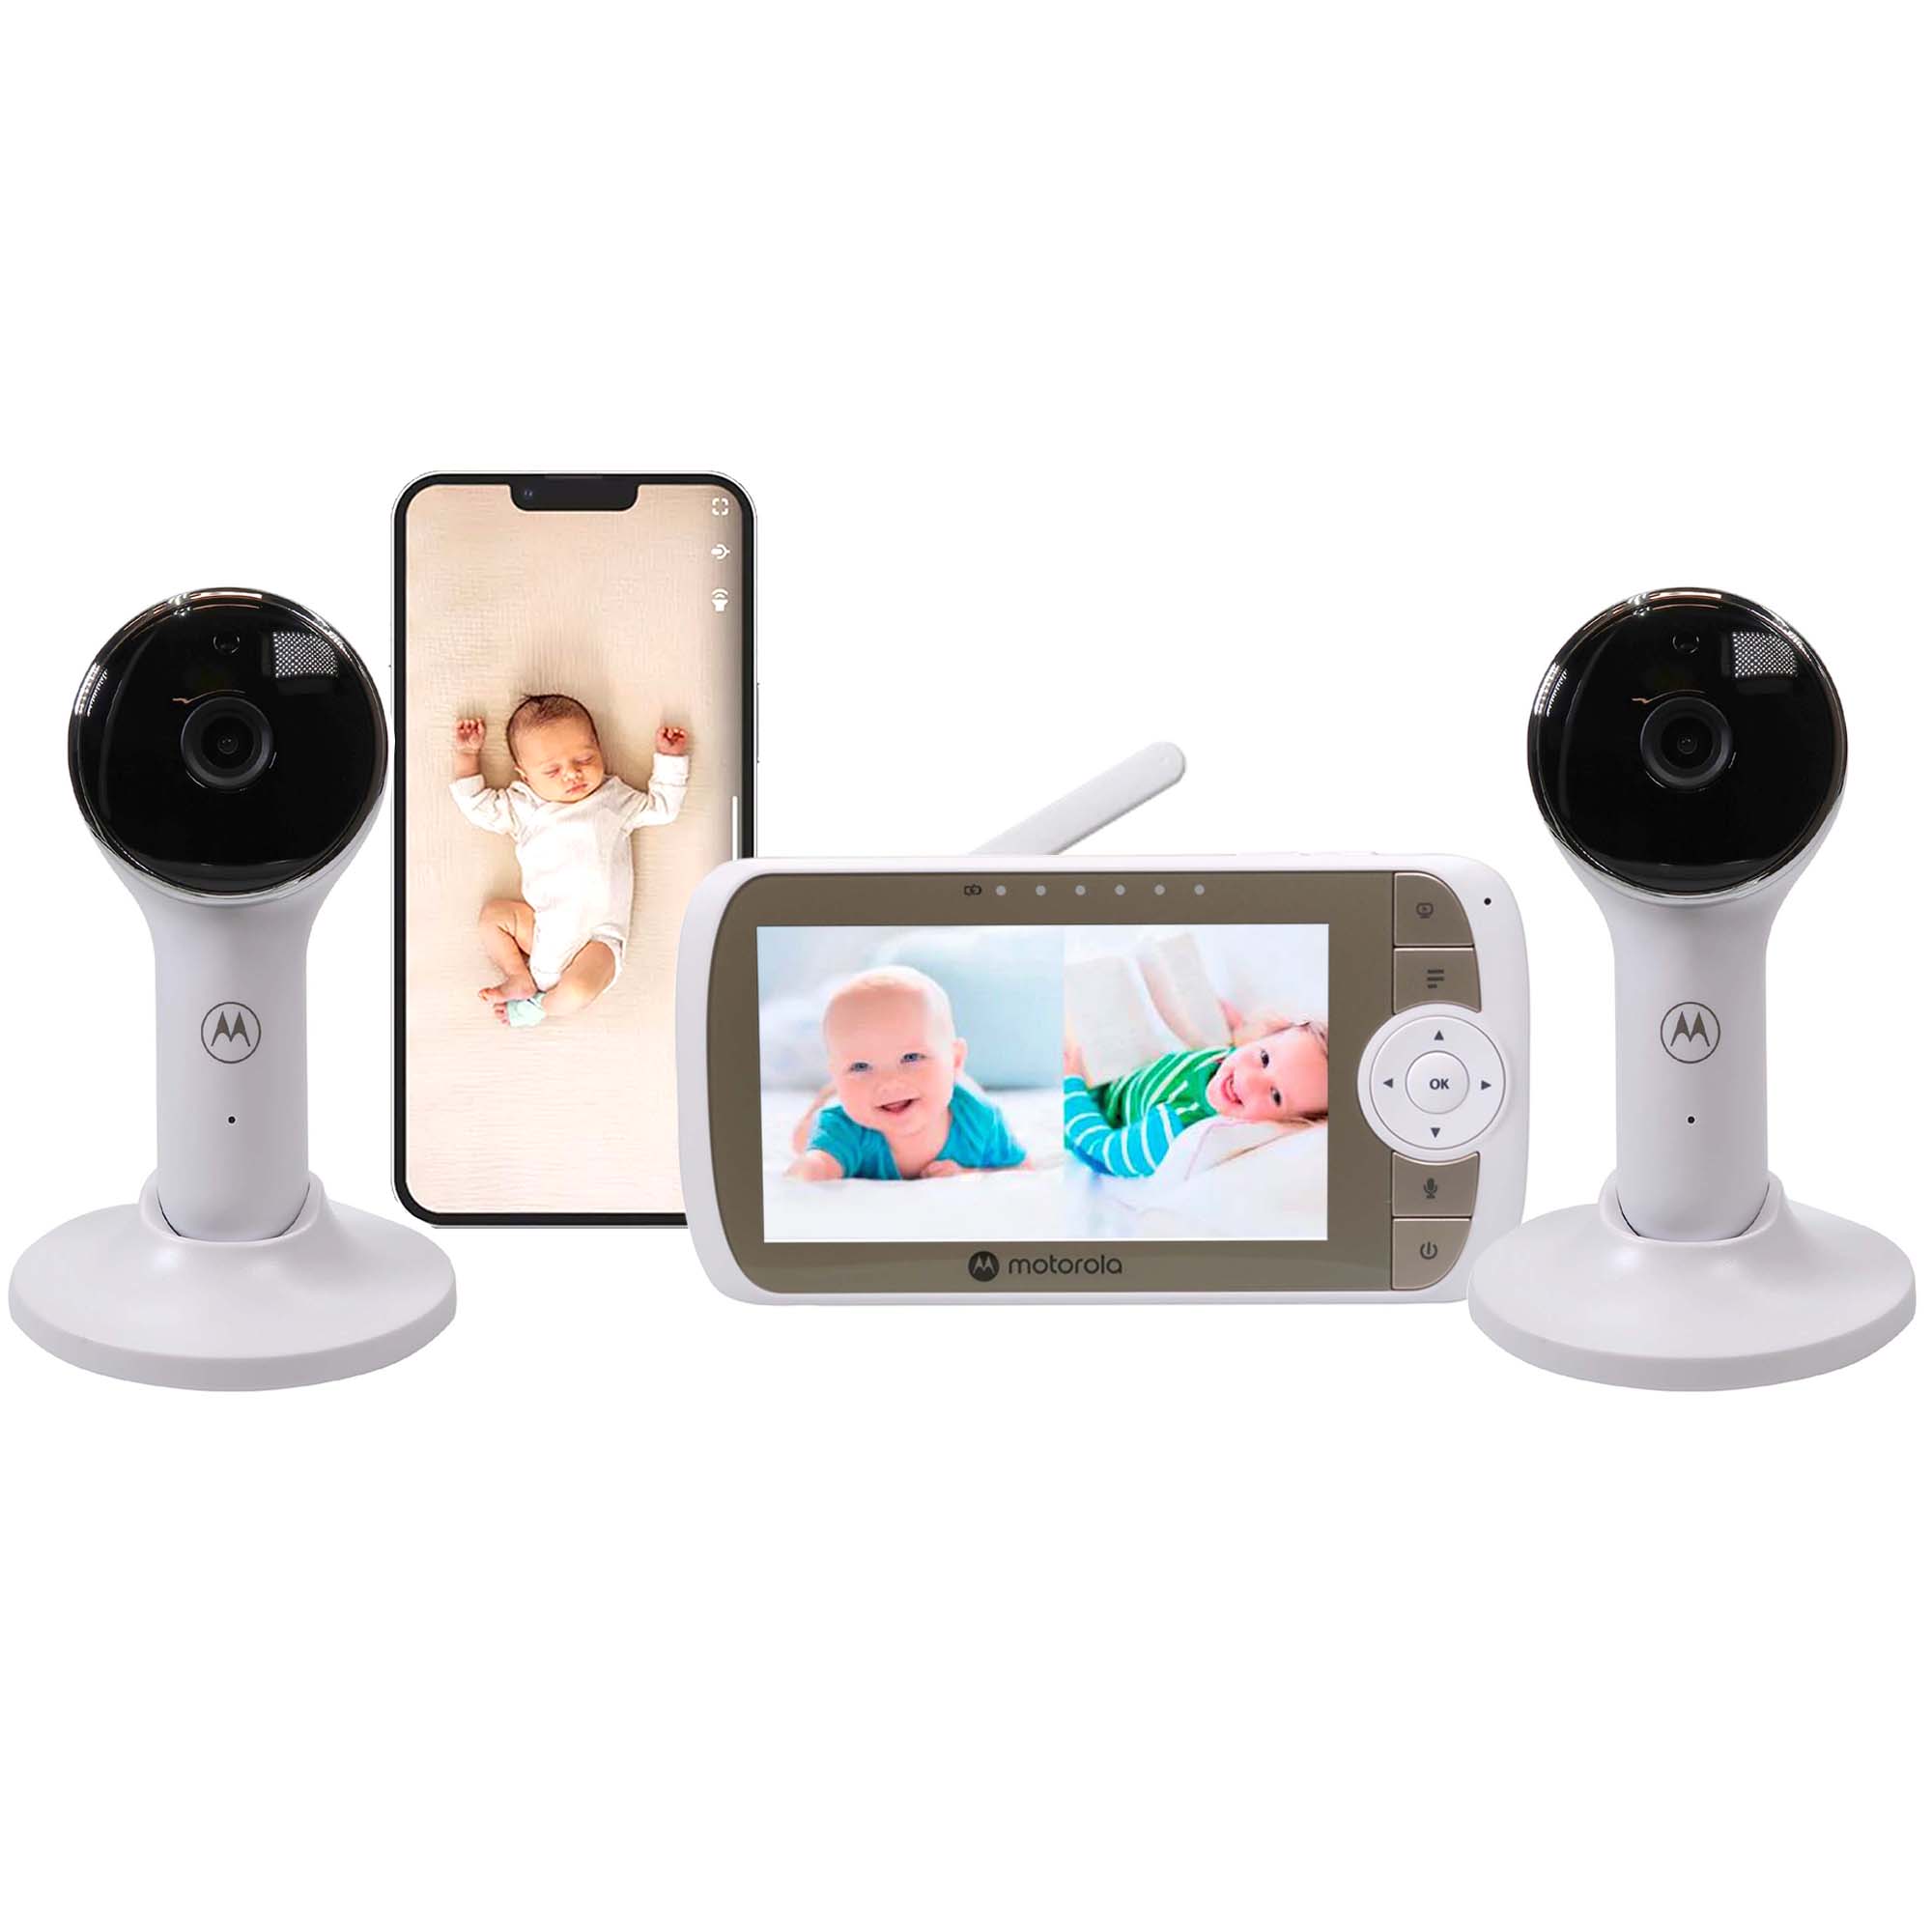 Motorola Full HD Wi-Fi Video Baby Monitor with 2 Cameras&comma; 5" Screen 1000ft Long Range Remote&comma; Connects to Smart Phone App - VM65-2 CONNECT